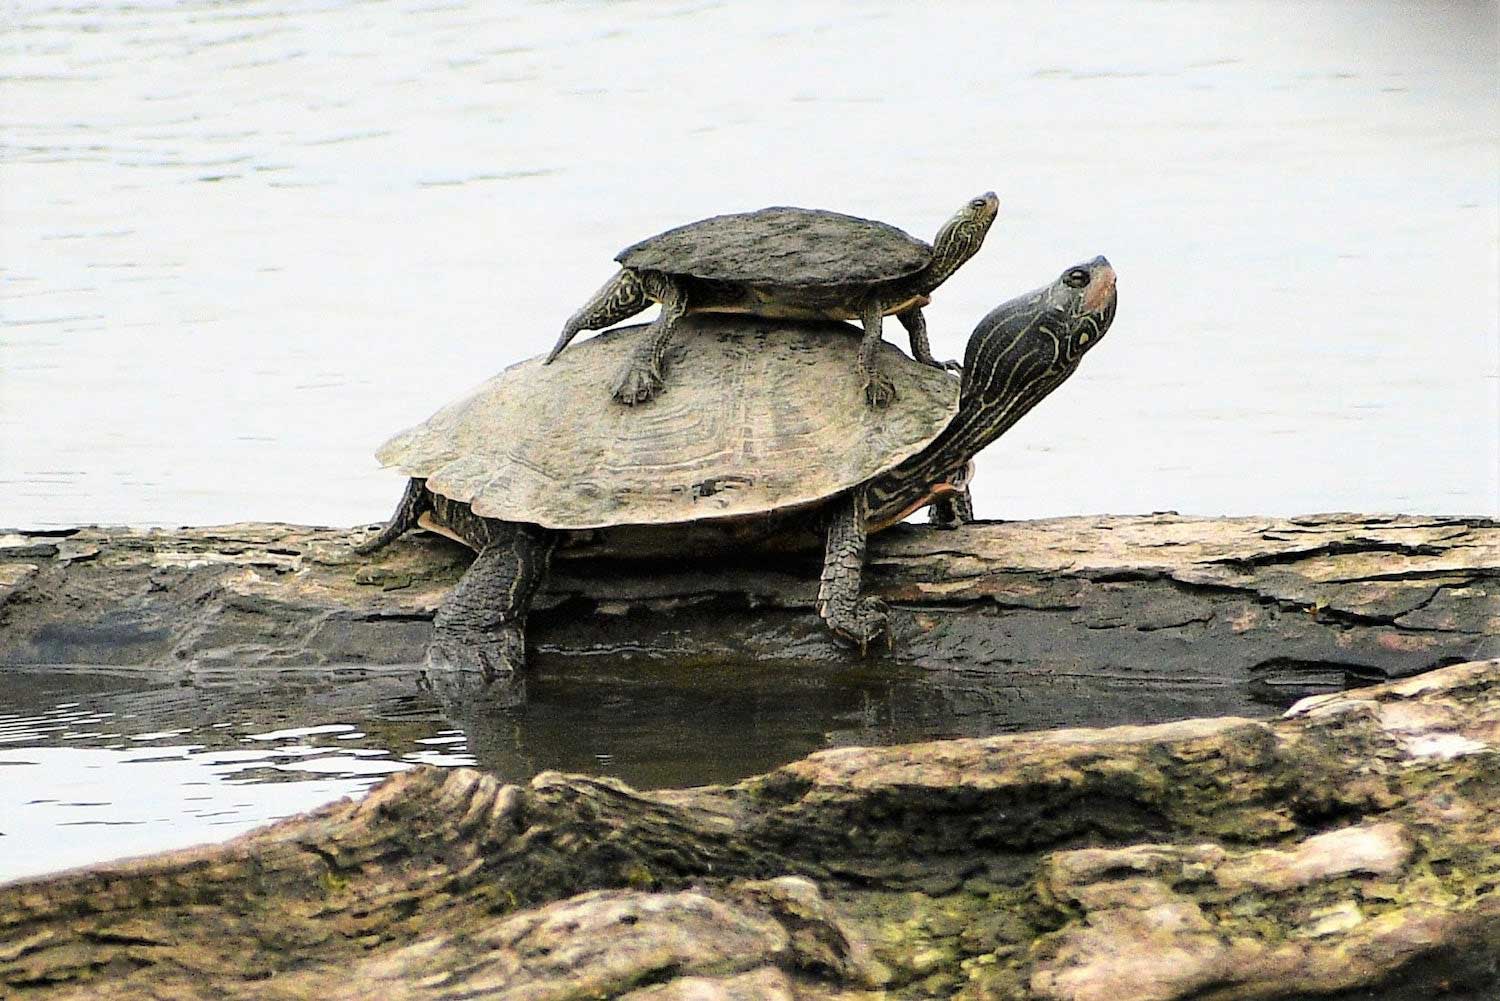 A turtle on a log with another turtle smaller turtle on top of it.